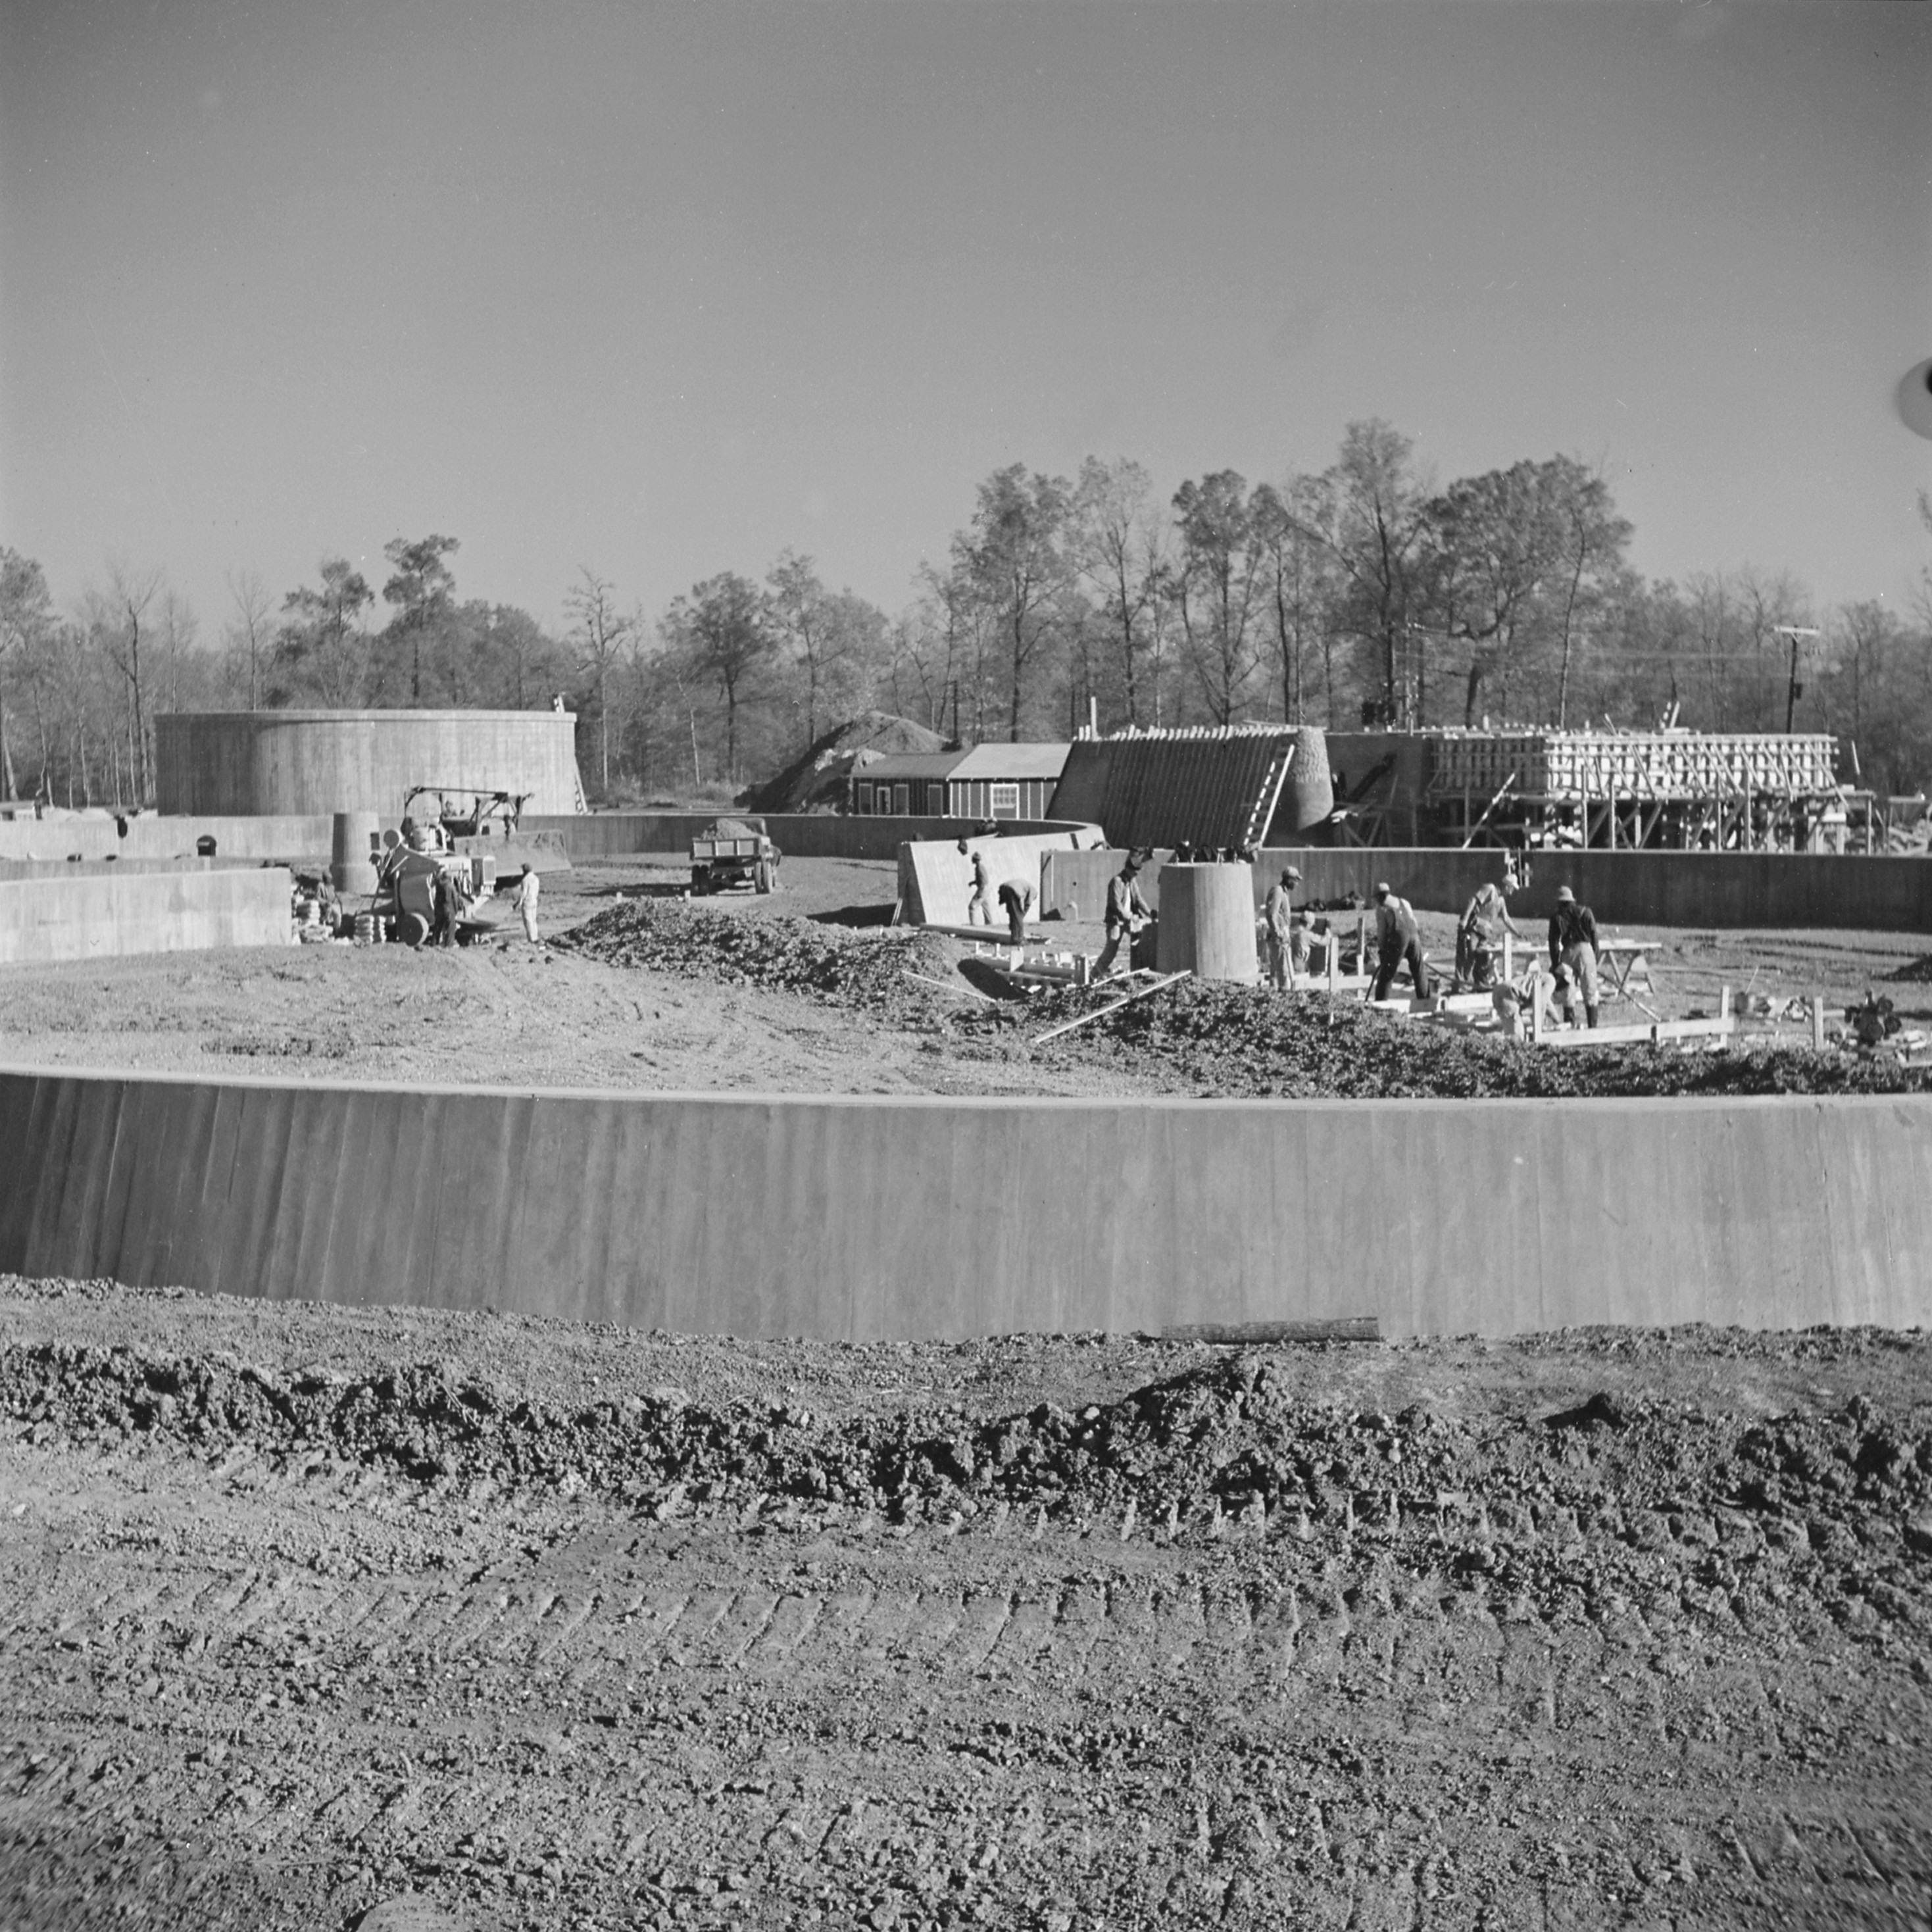 Construction of the sewage disposal plant at Jerome War Relocation Center, Arkansas, United States, 14 Nov 1942, photo 2 of 5